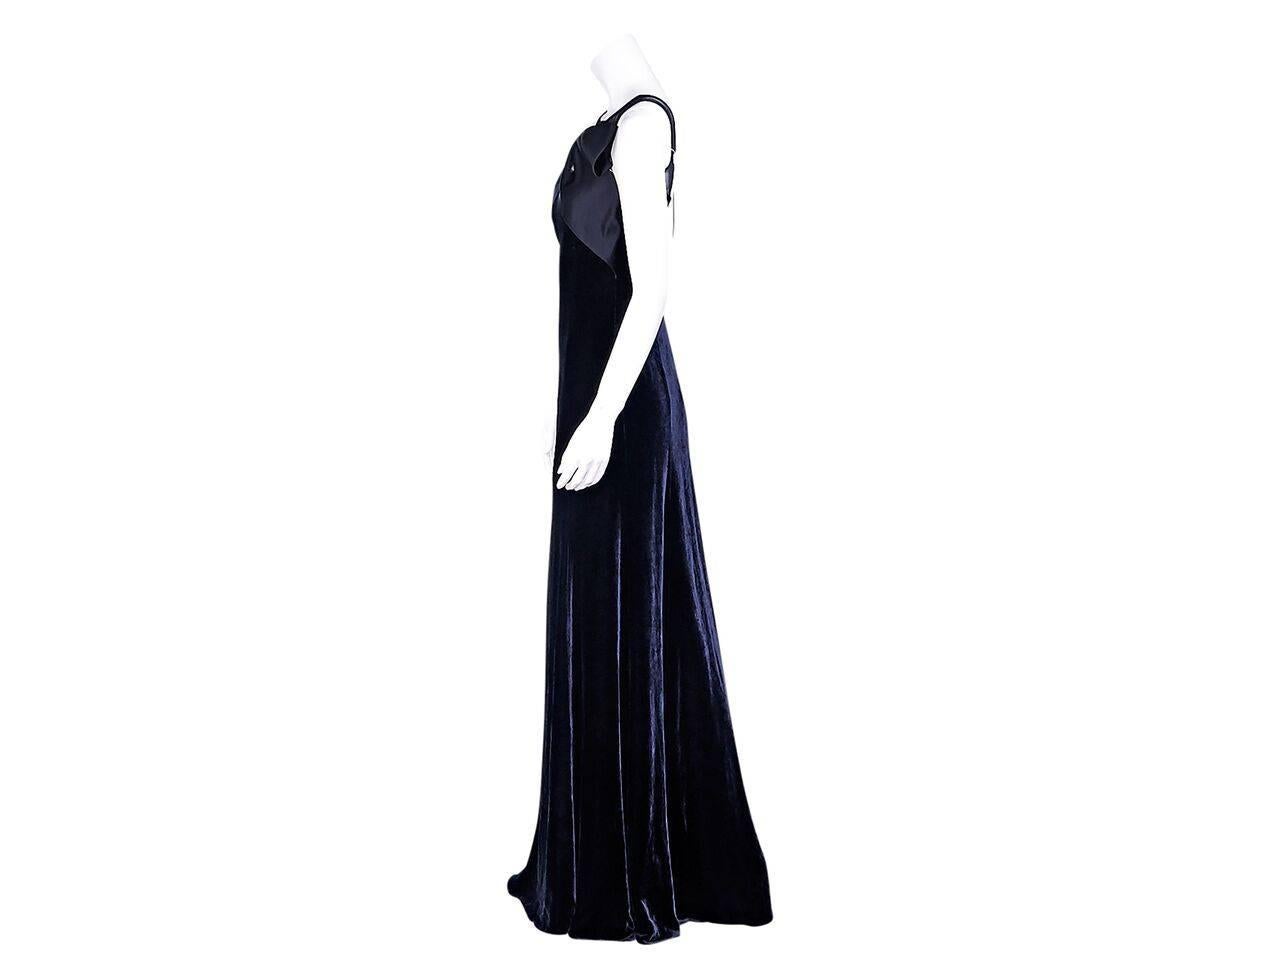 Product details:  Navy blue velvet gown by Armani Collezioni.  Wide boatneck.  Sleeveless.  Draped bodice detail.  Scoopback.  Concealed back zip closure.  
Condition: Pre-owned. New with tags.
Est. Retail $ 1,495.00